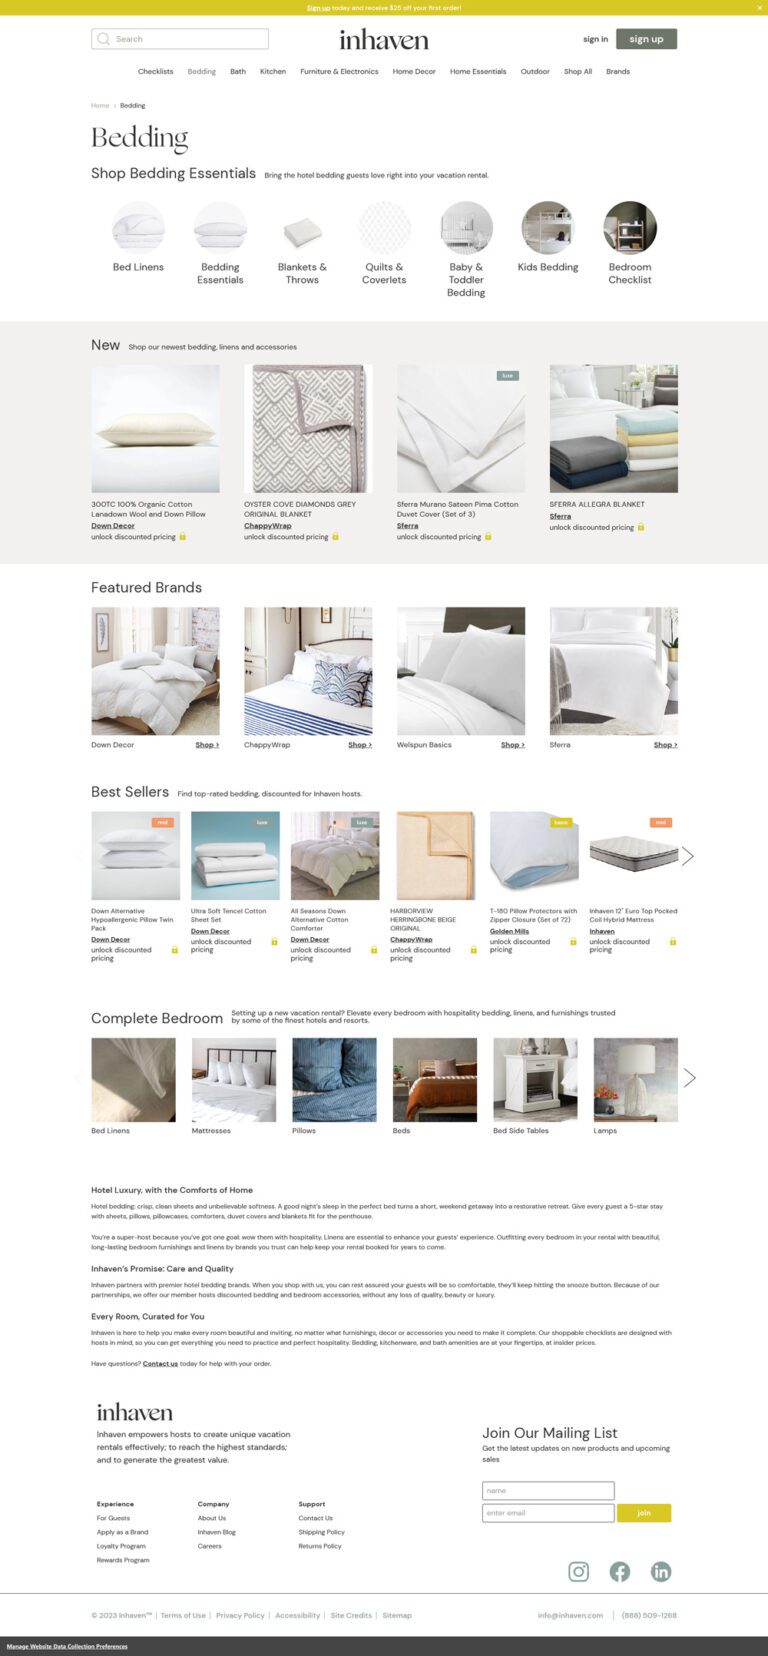 Inhaven Bedding product page